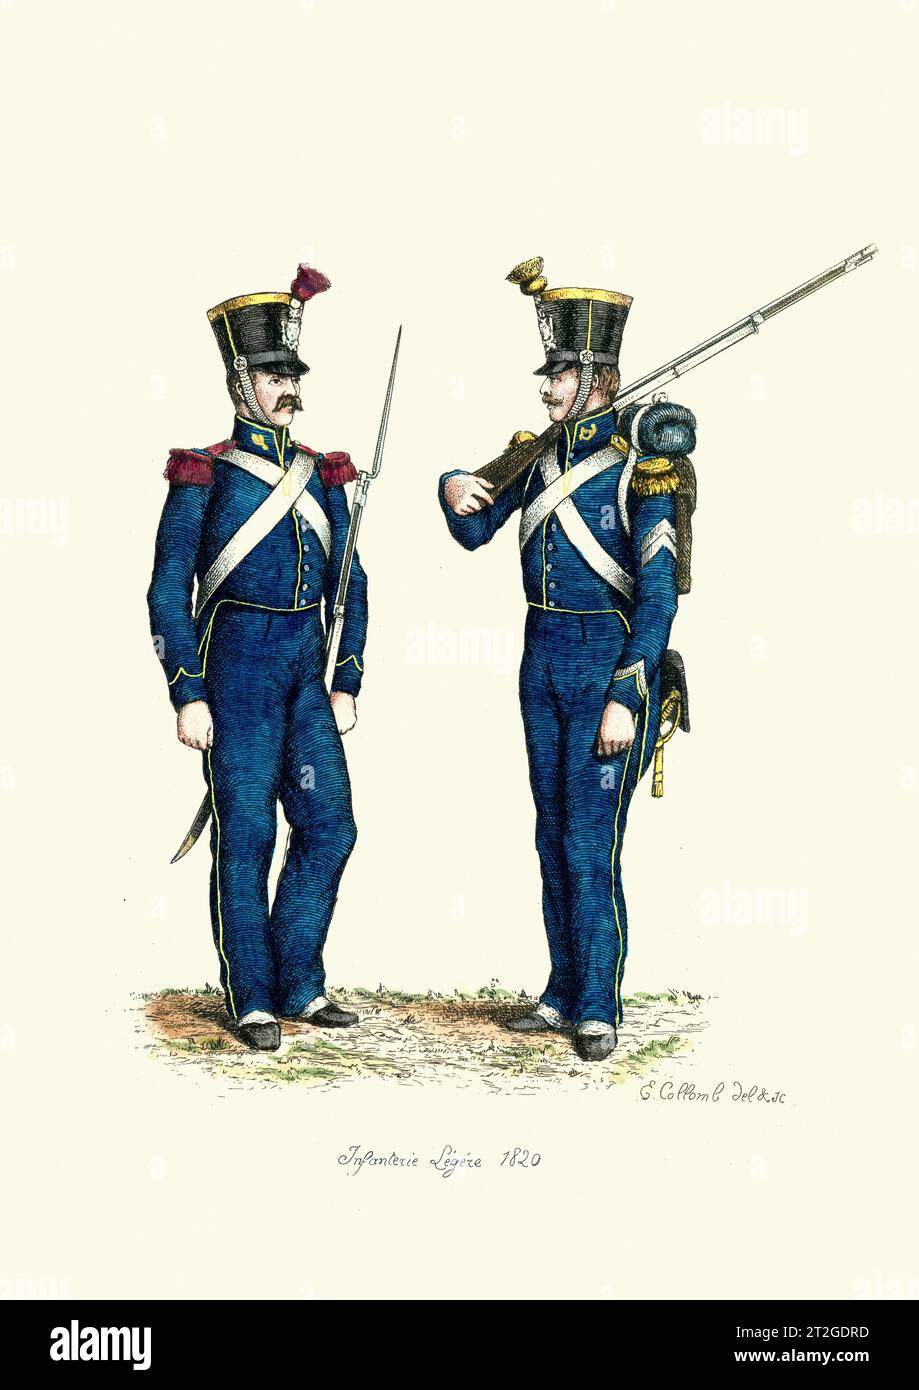 French Military Uniforms, 19th Century, History, Infantry soliders, 1820, Infanterie Ligere Stock Photo